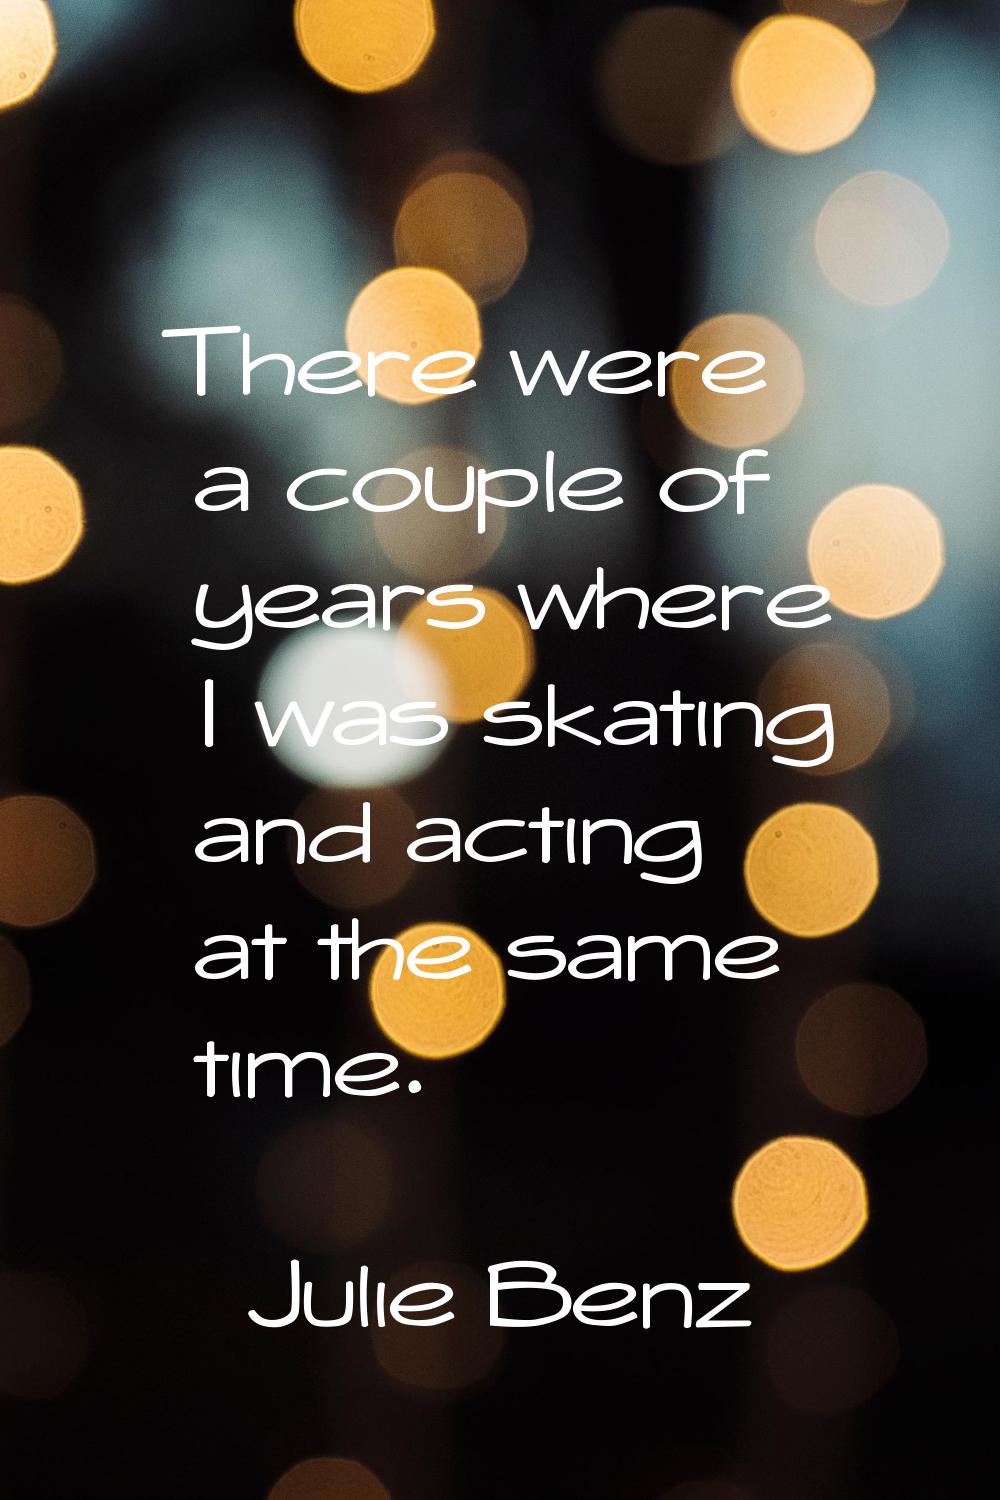 There were a couple of years where I was skating and acting at the same time.